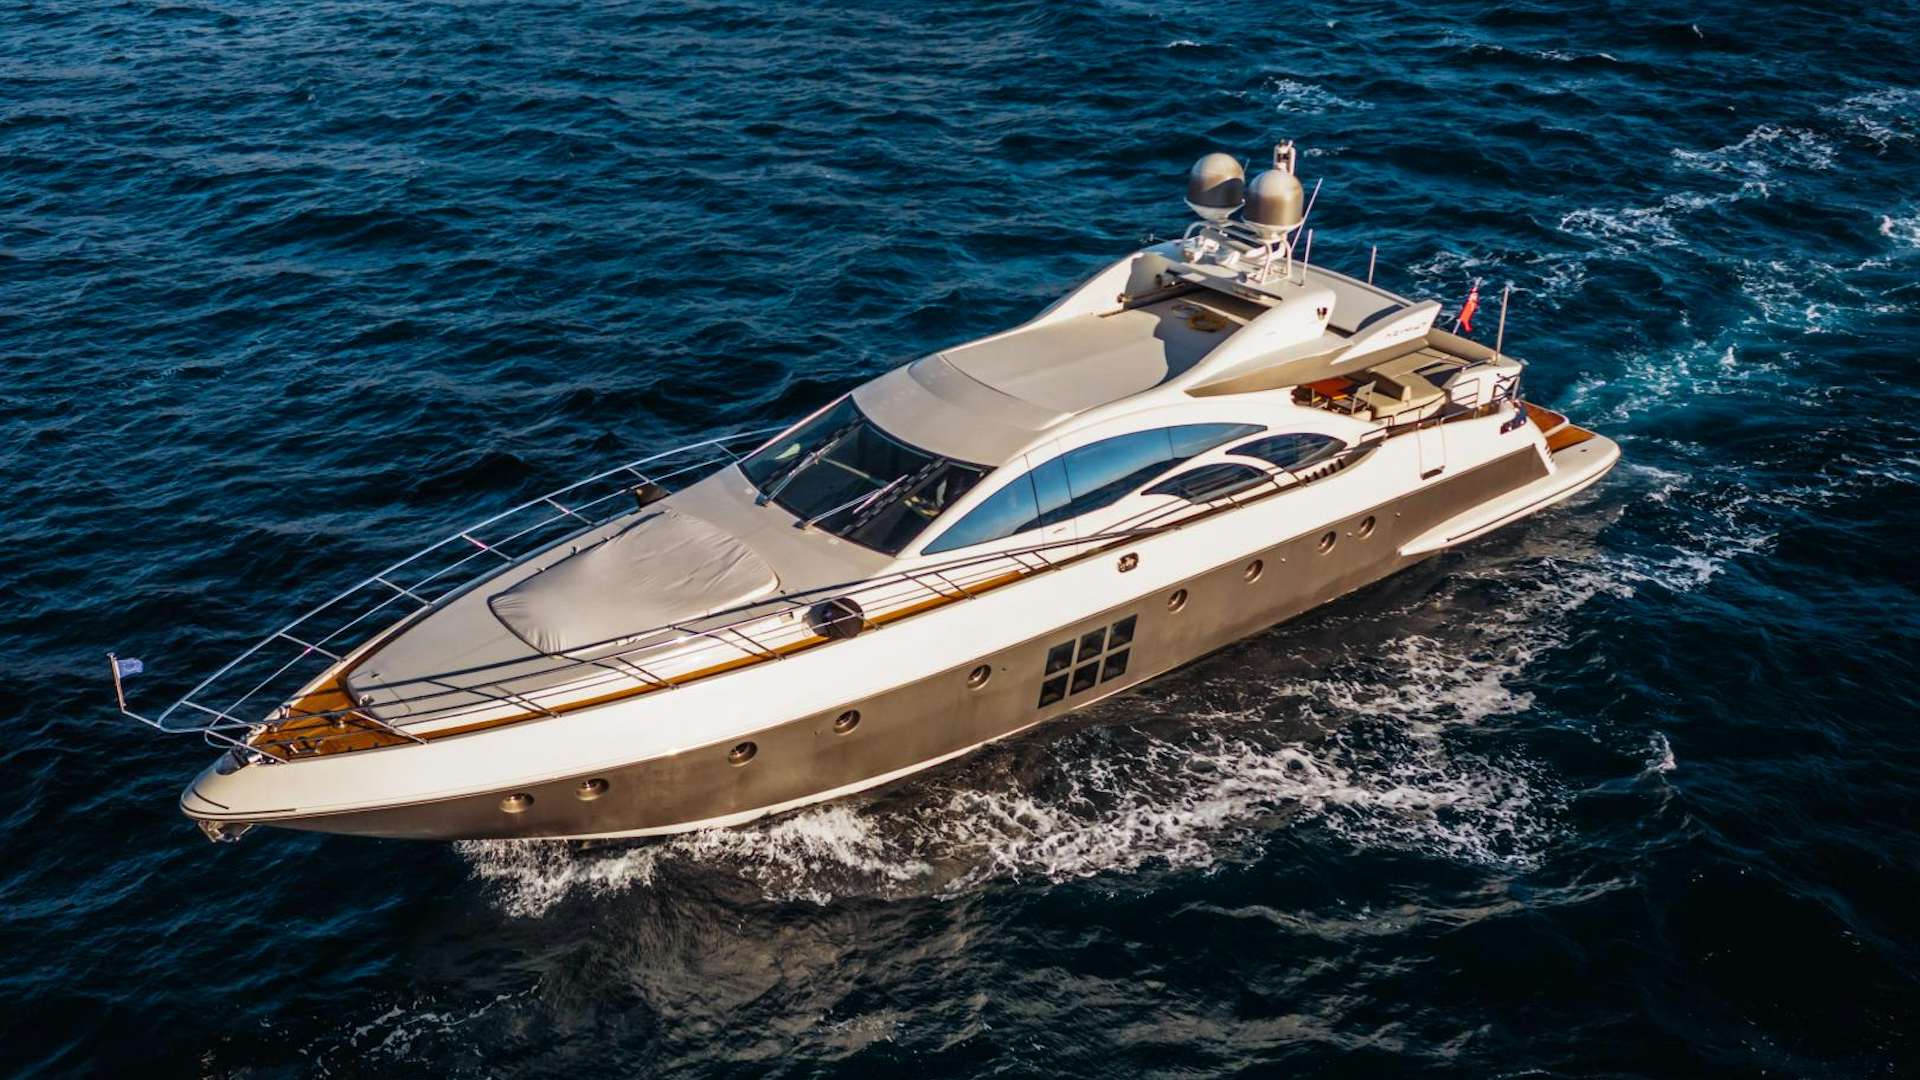 Watch Video for NAMI Yacht for Sale